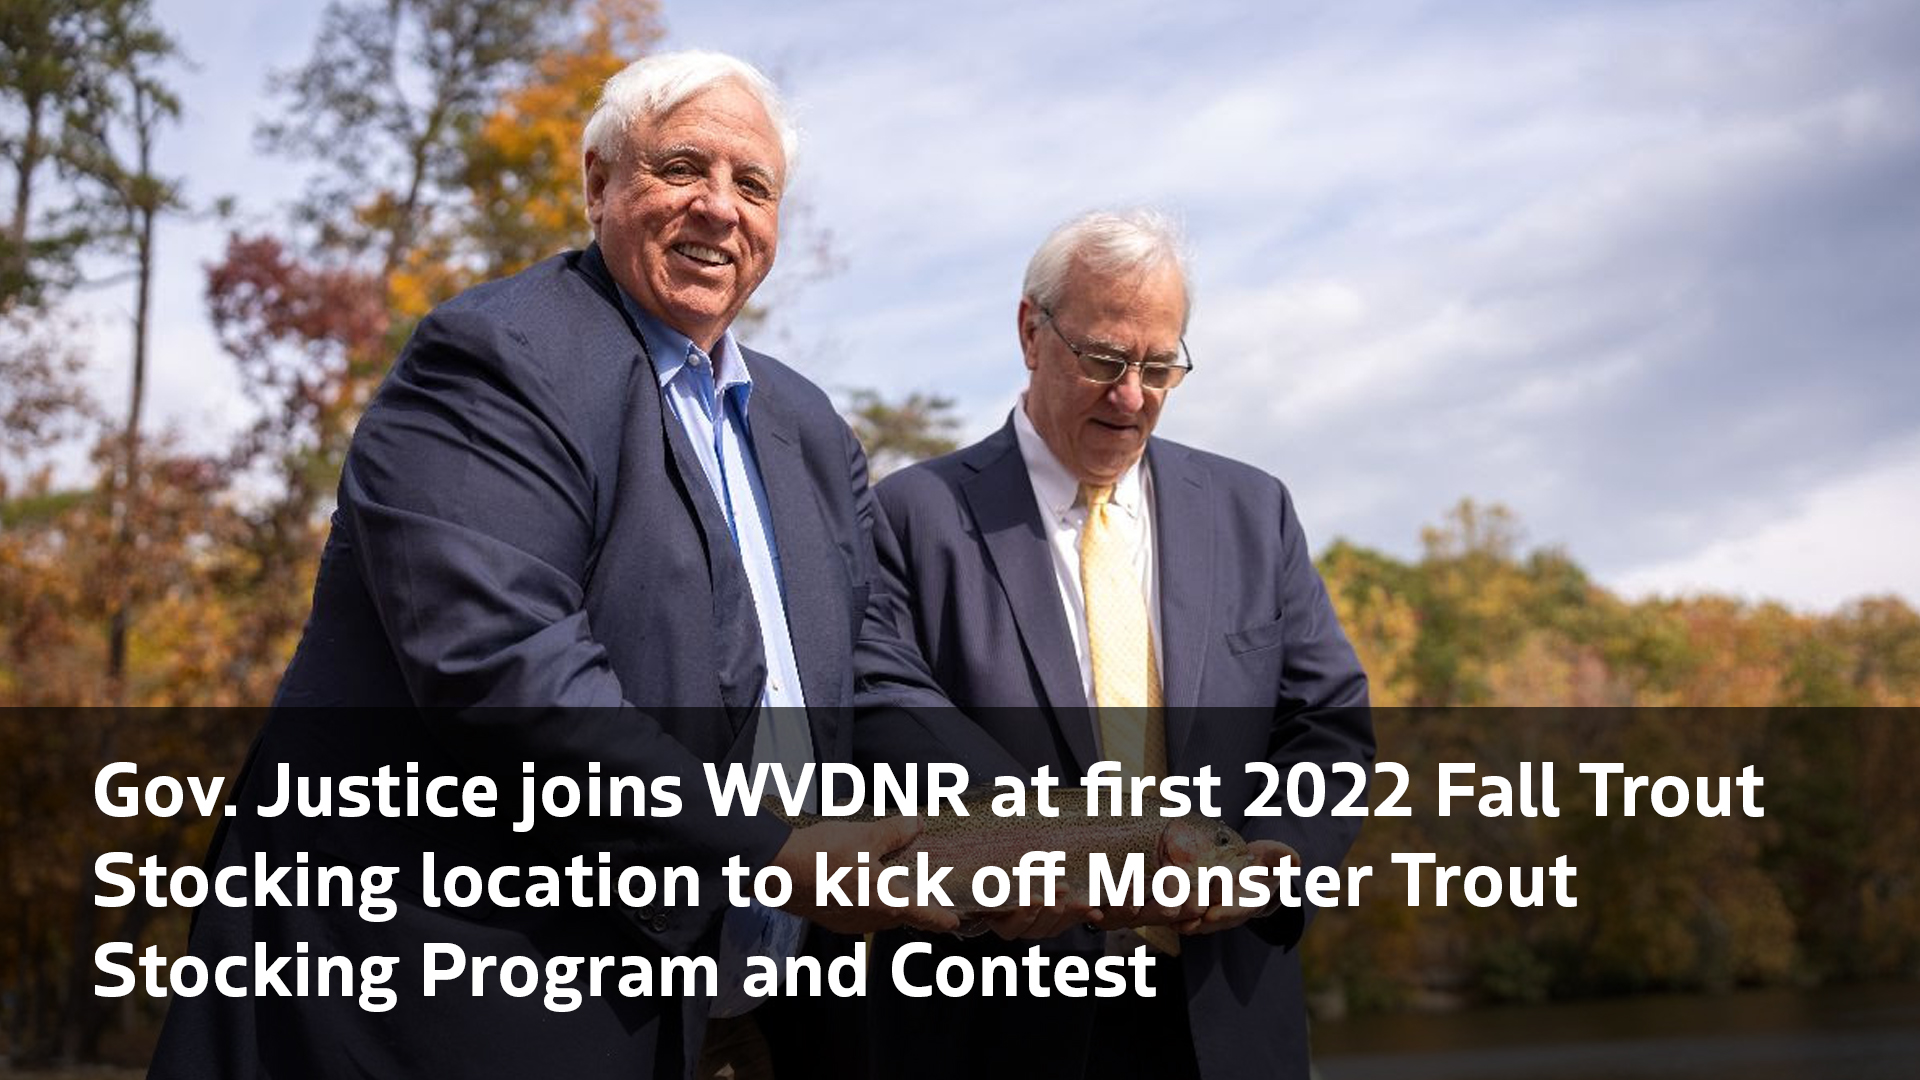 Gov. Justice kicks off 2022 Fall Trout Stocking and Monster Trout Stocking Program and Contest at Cacapon Resort State Park